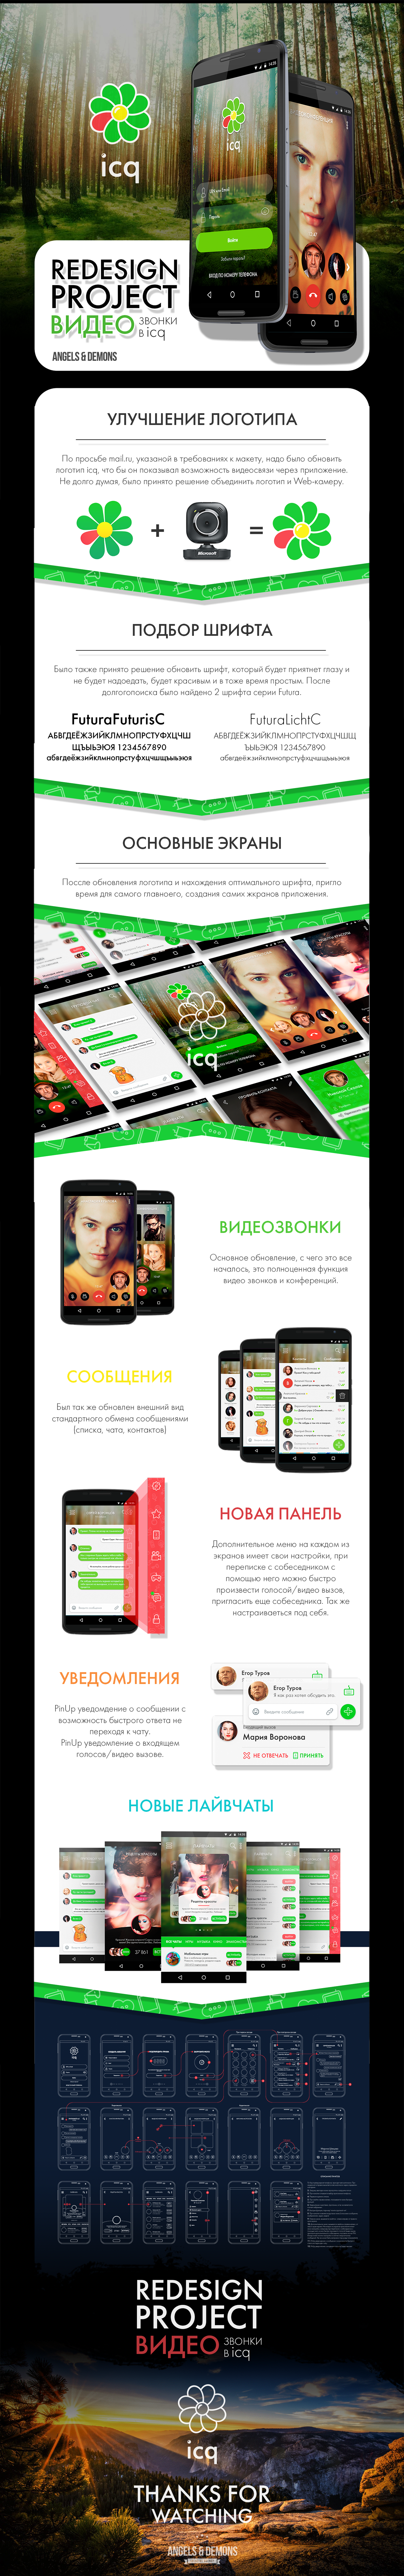 ICQ redesign app android best UI ux contest application Mobile app Chat app design material design projects